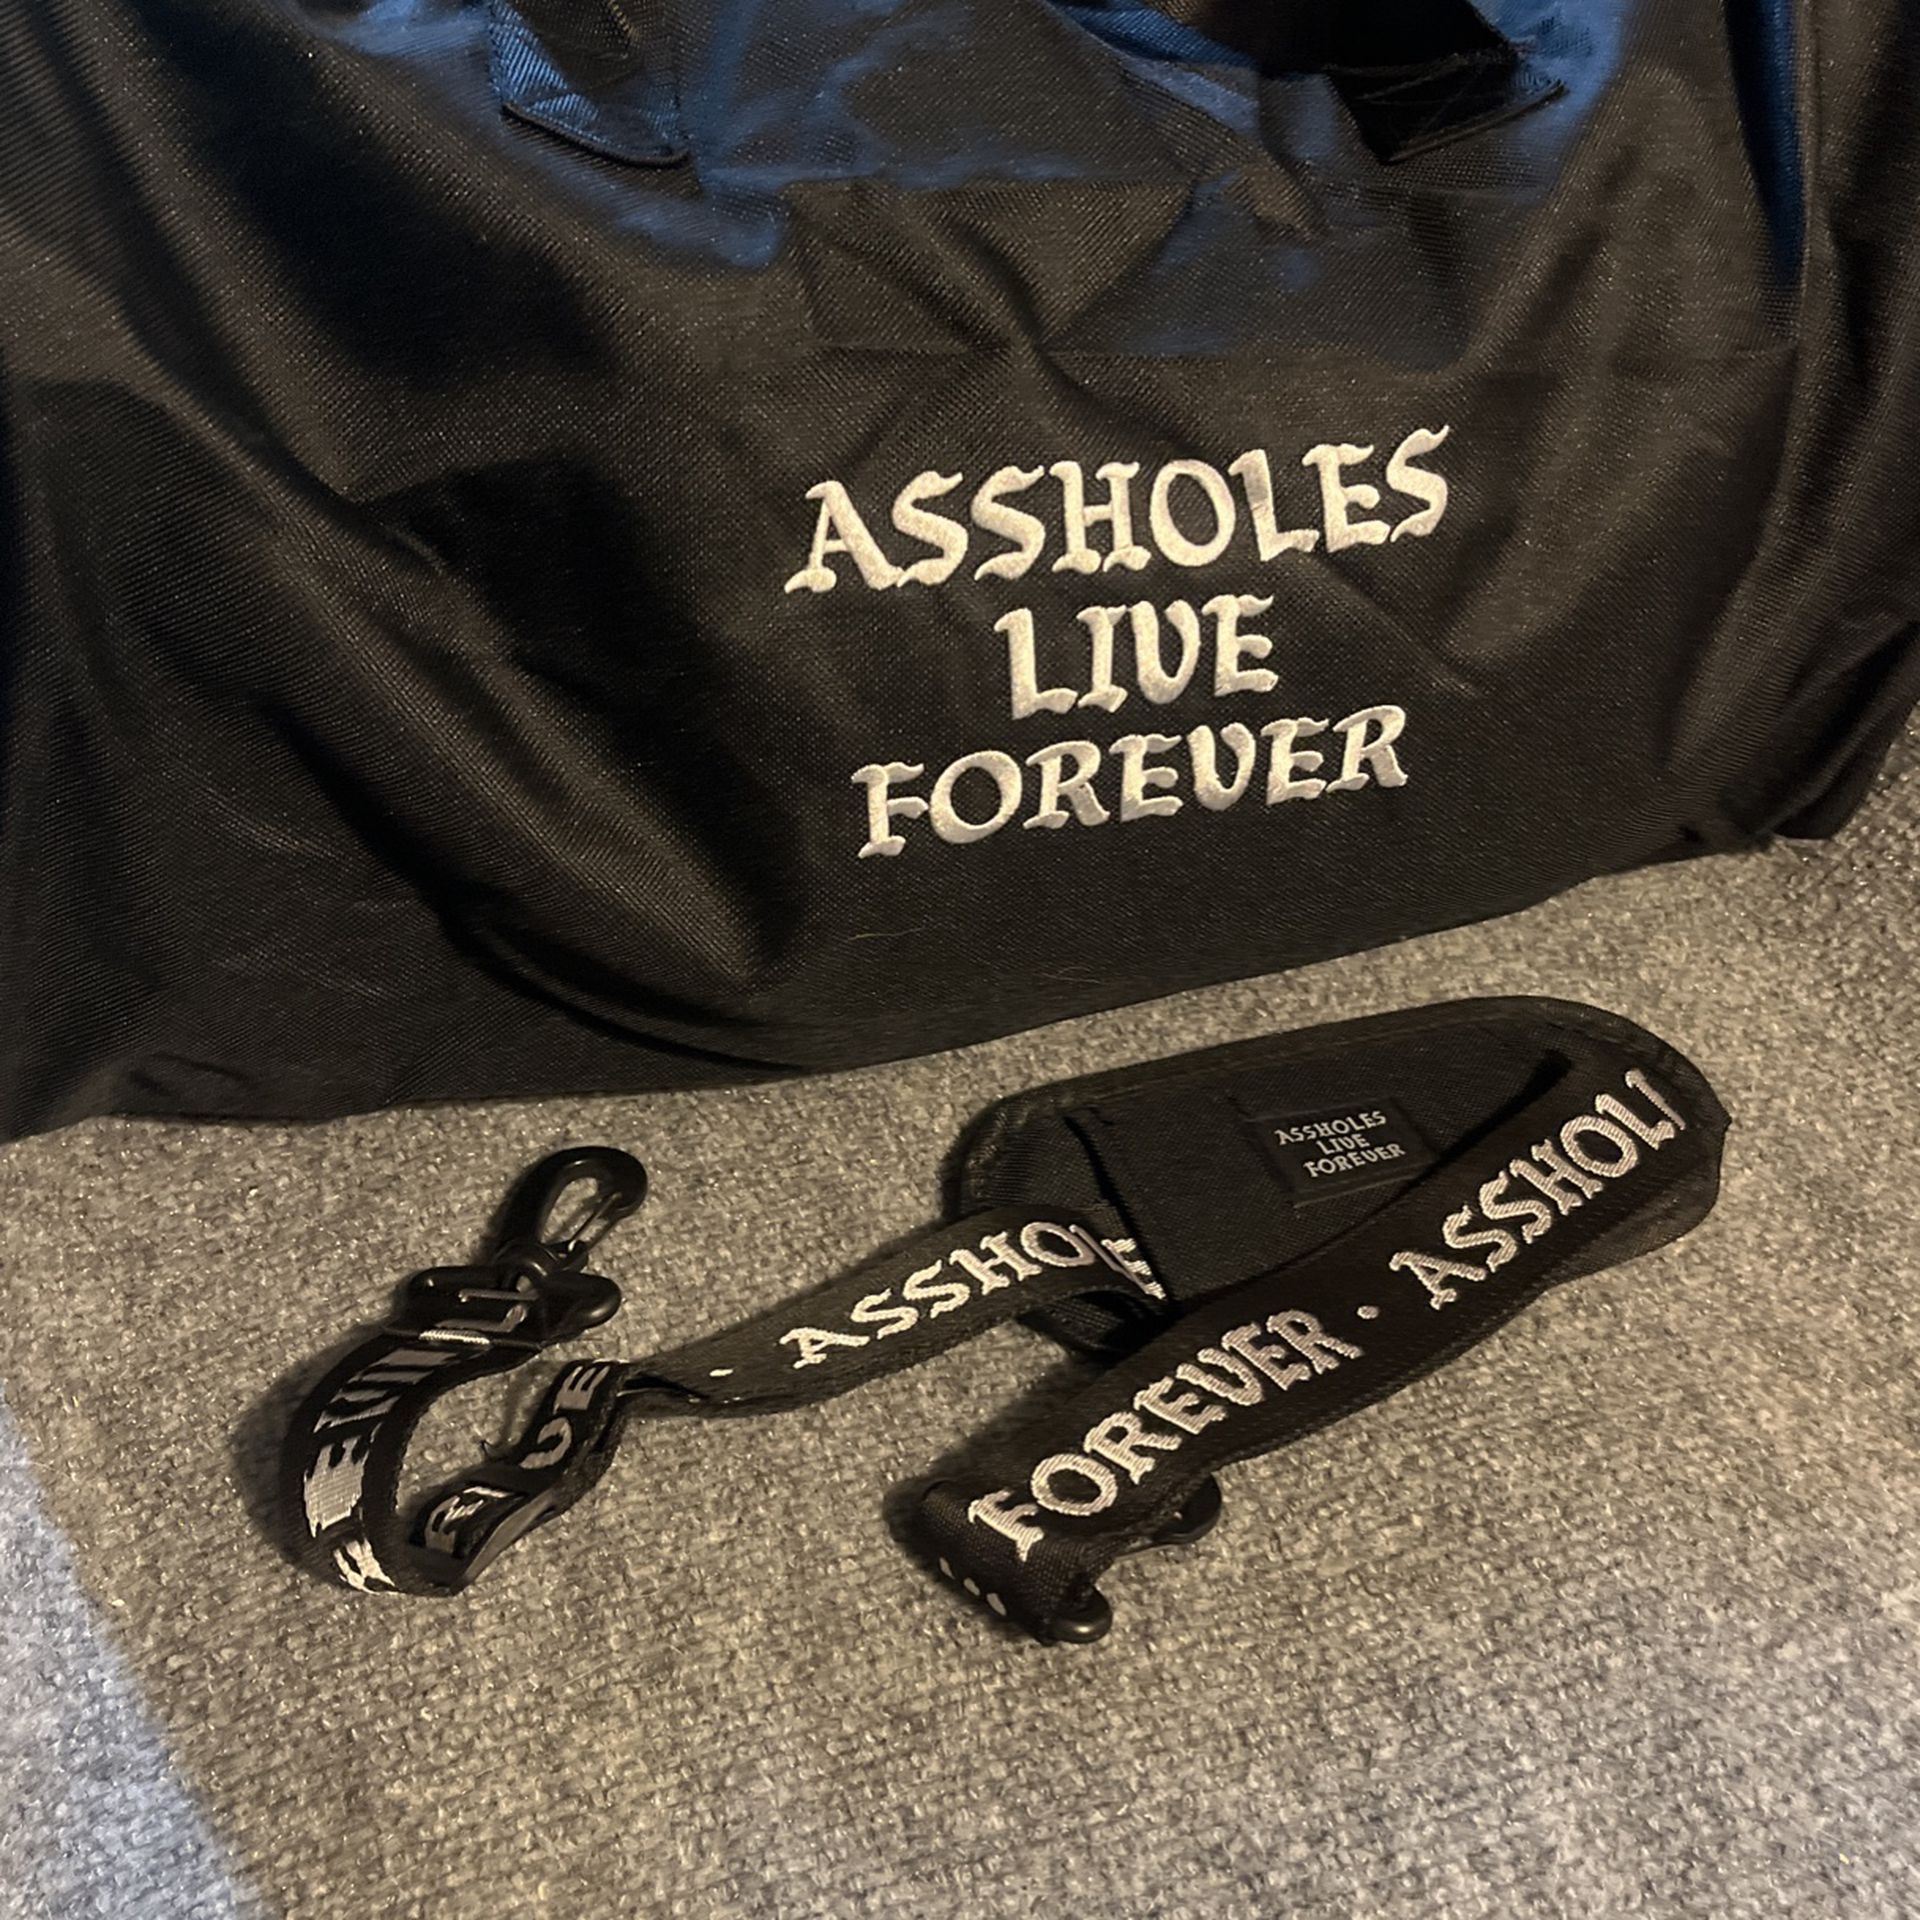 ASSHOLES*S LIVE FOREVER - Emotional Baggage Duffle Bag Pink/White Cheetah  NEW